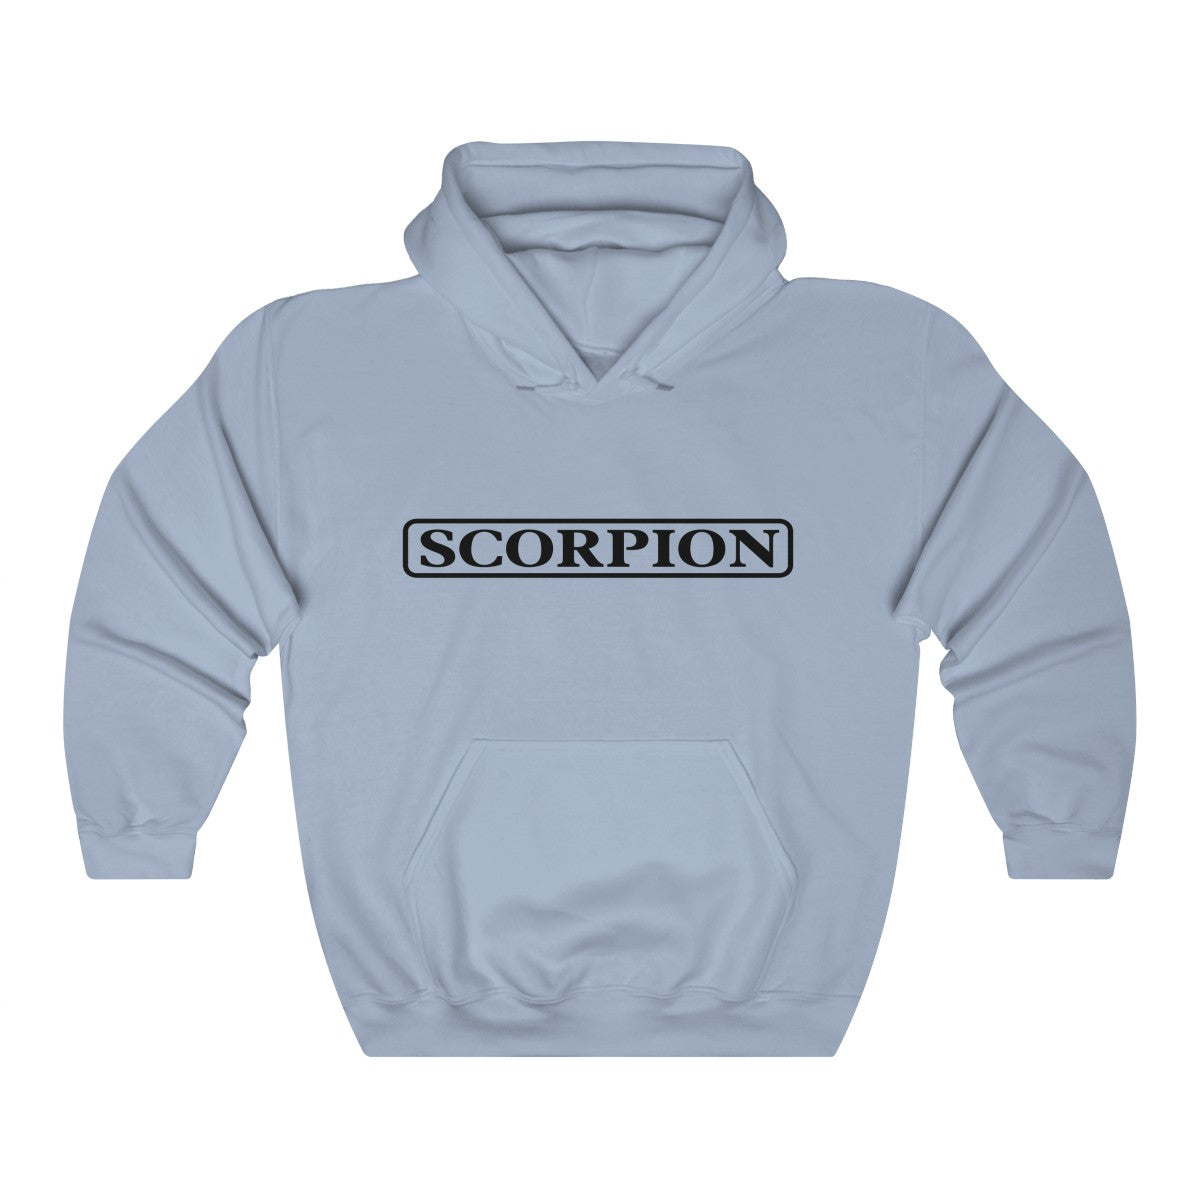 Scorpion Drizzy Drake Scary Hours Merch Inspired Heavy Blend™ Hoodie-Light Blue-S-Archethype